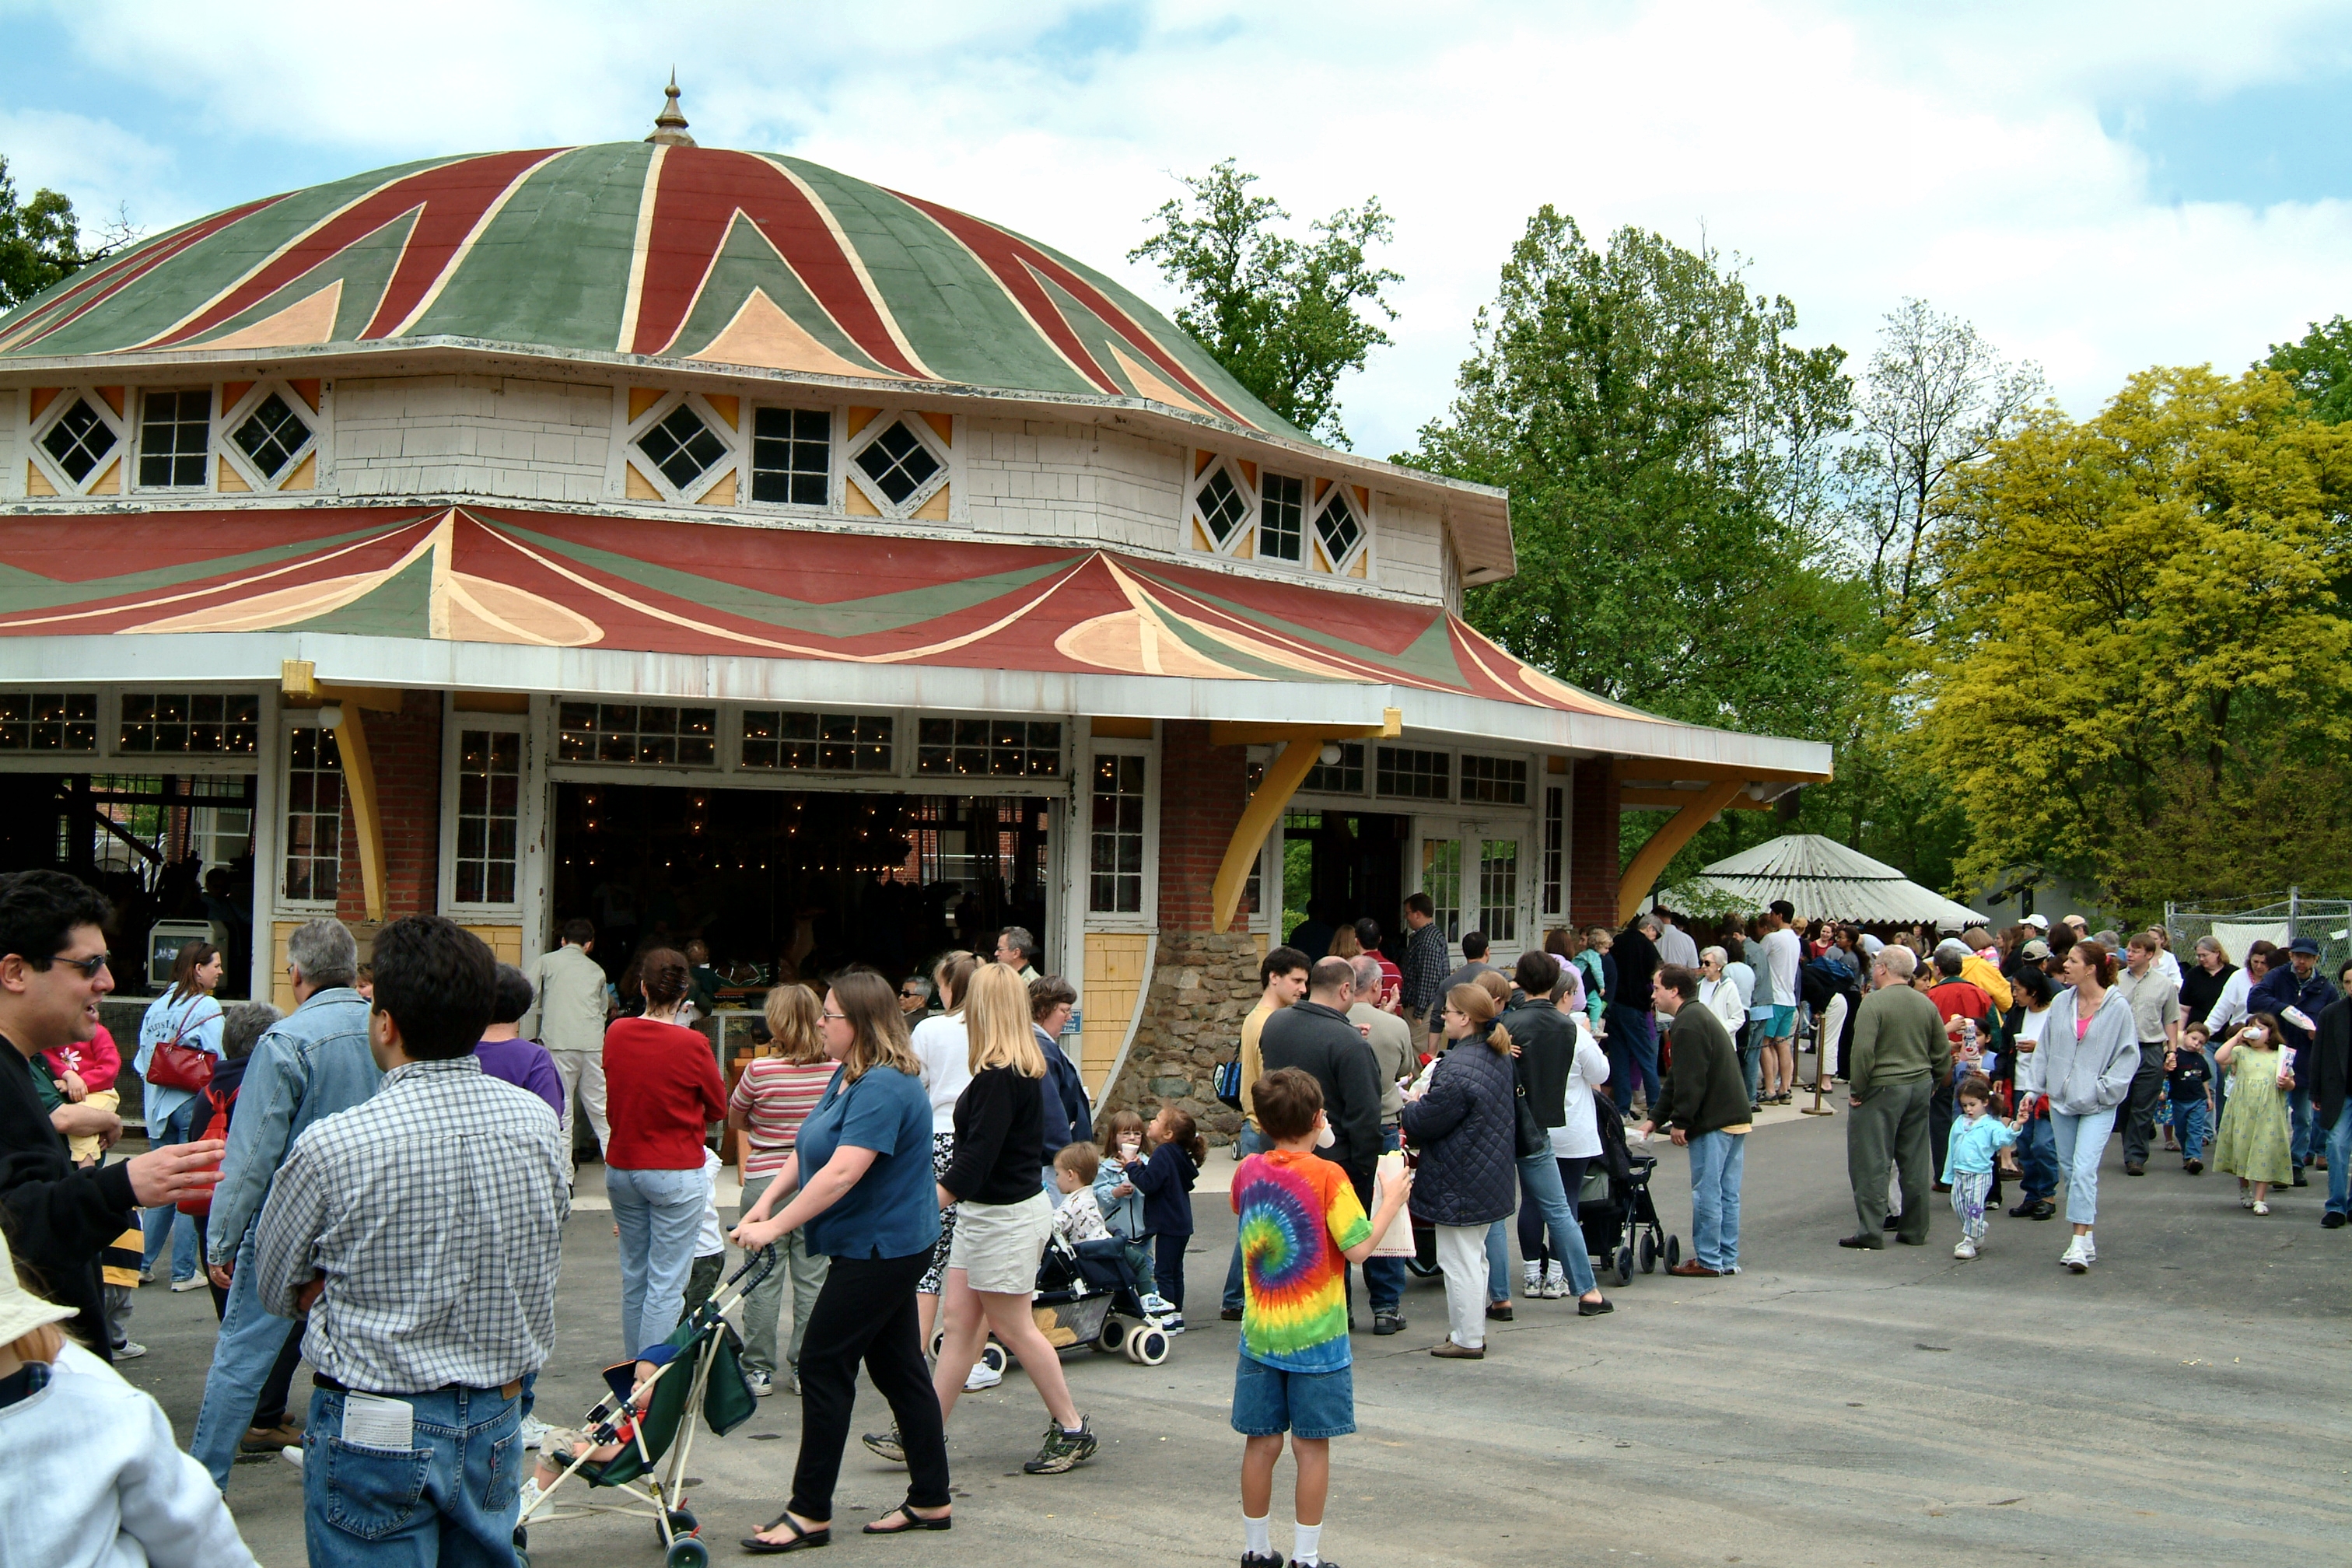 groups of families, adults and children strolling in Glen Echo Park near Carousel Building